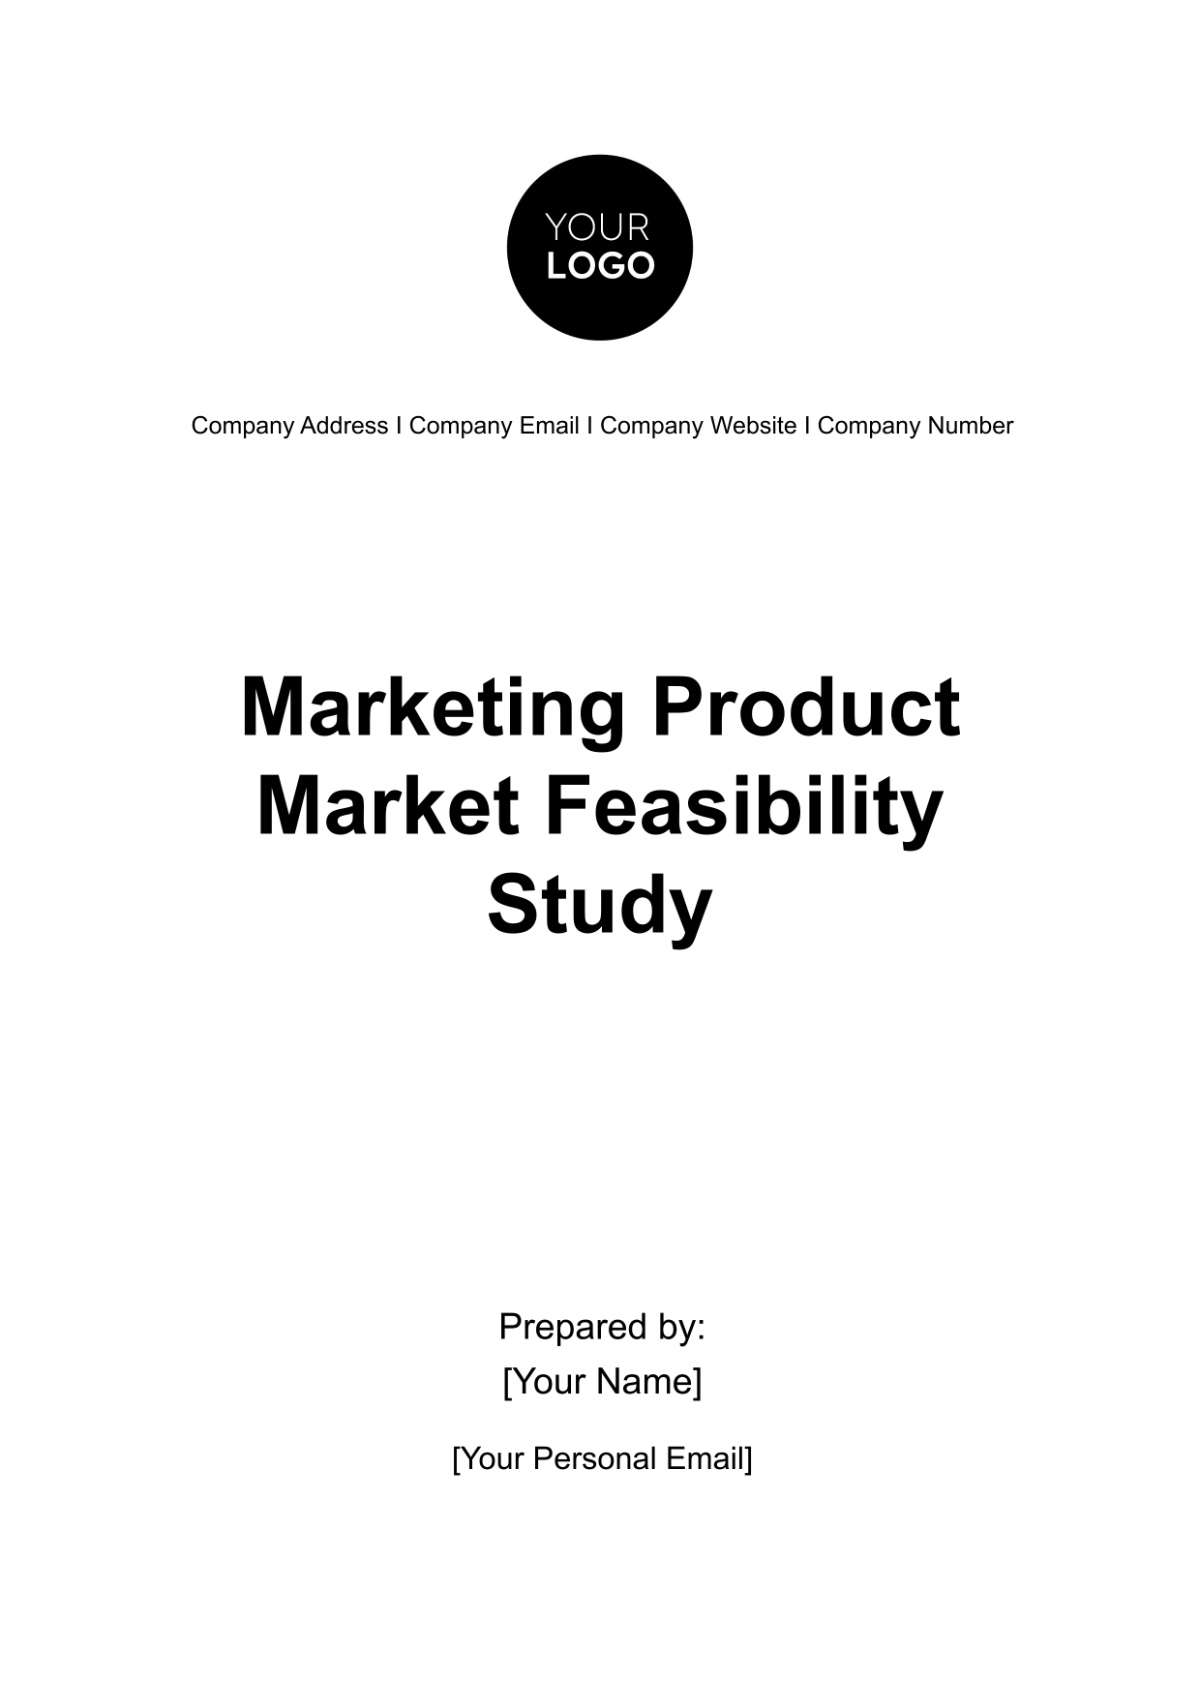 Marketing Product Market Feasibility Study Template